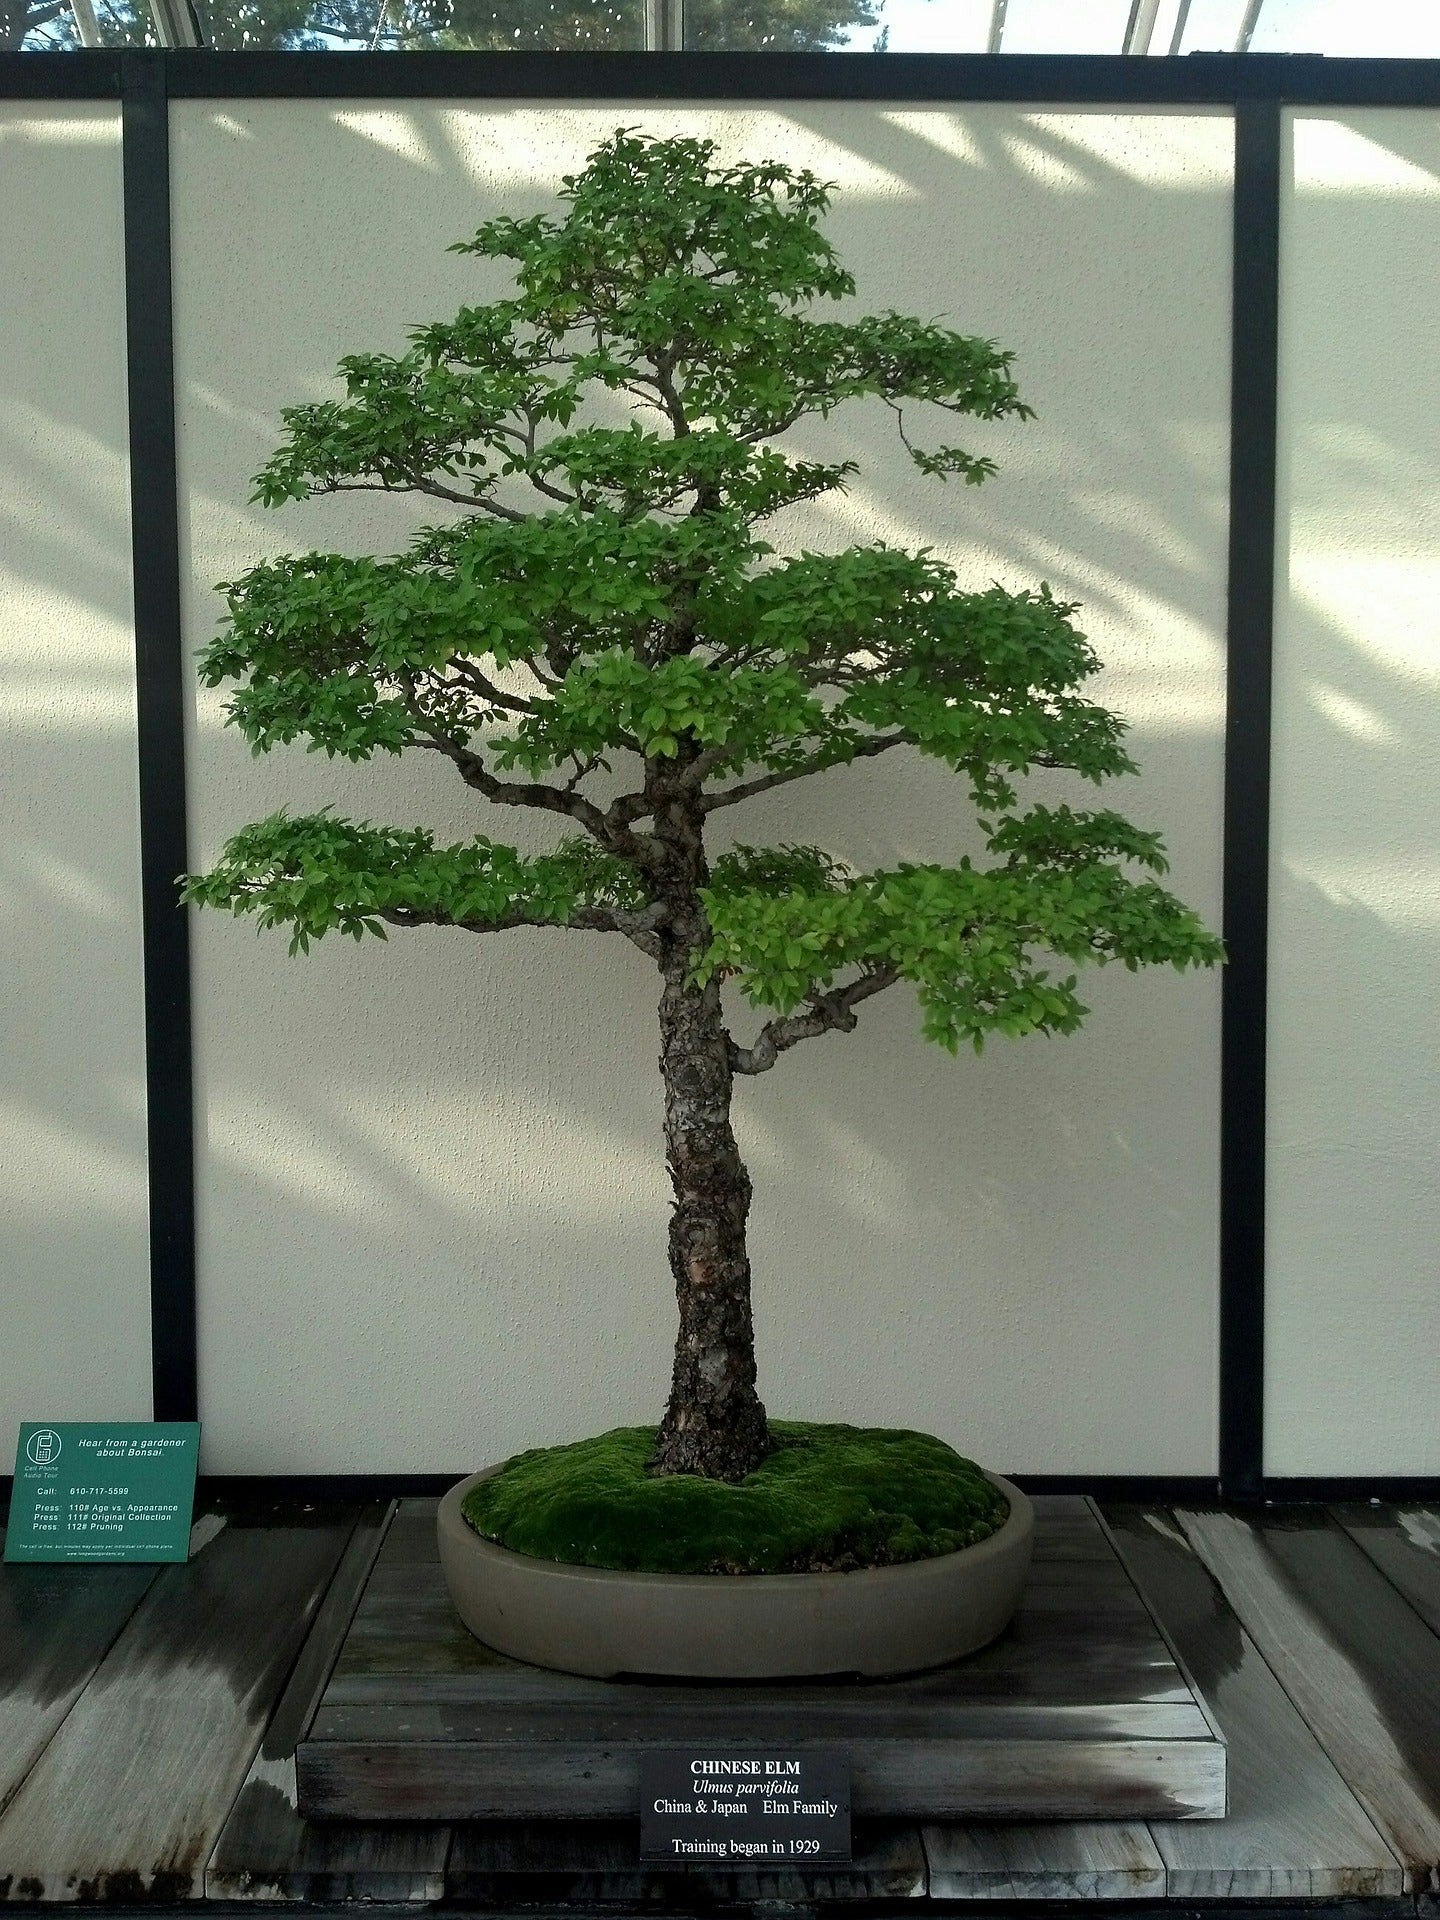 Can You Grow a Tree from a Bonsai Growing Kit?